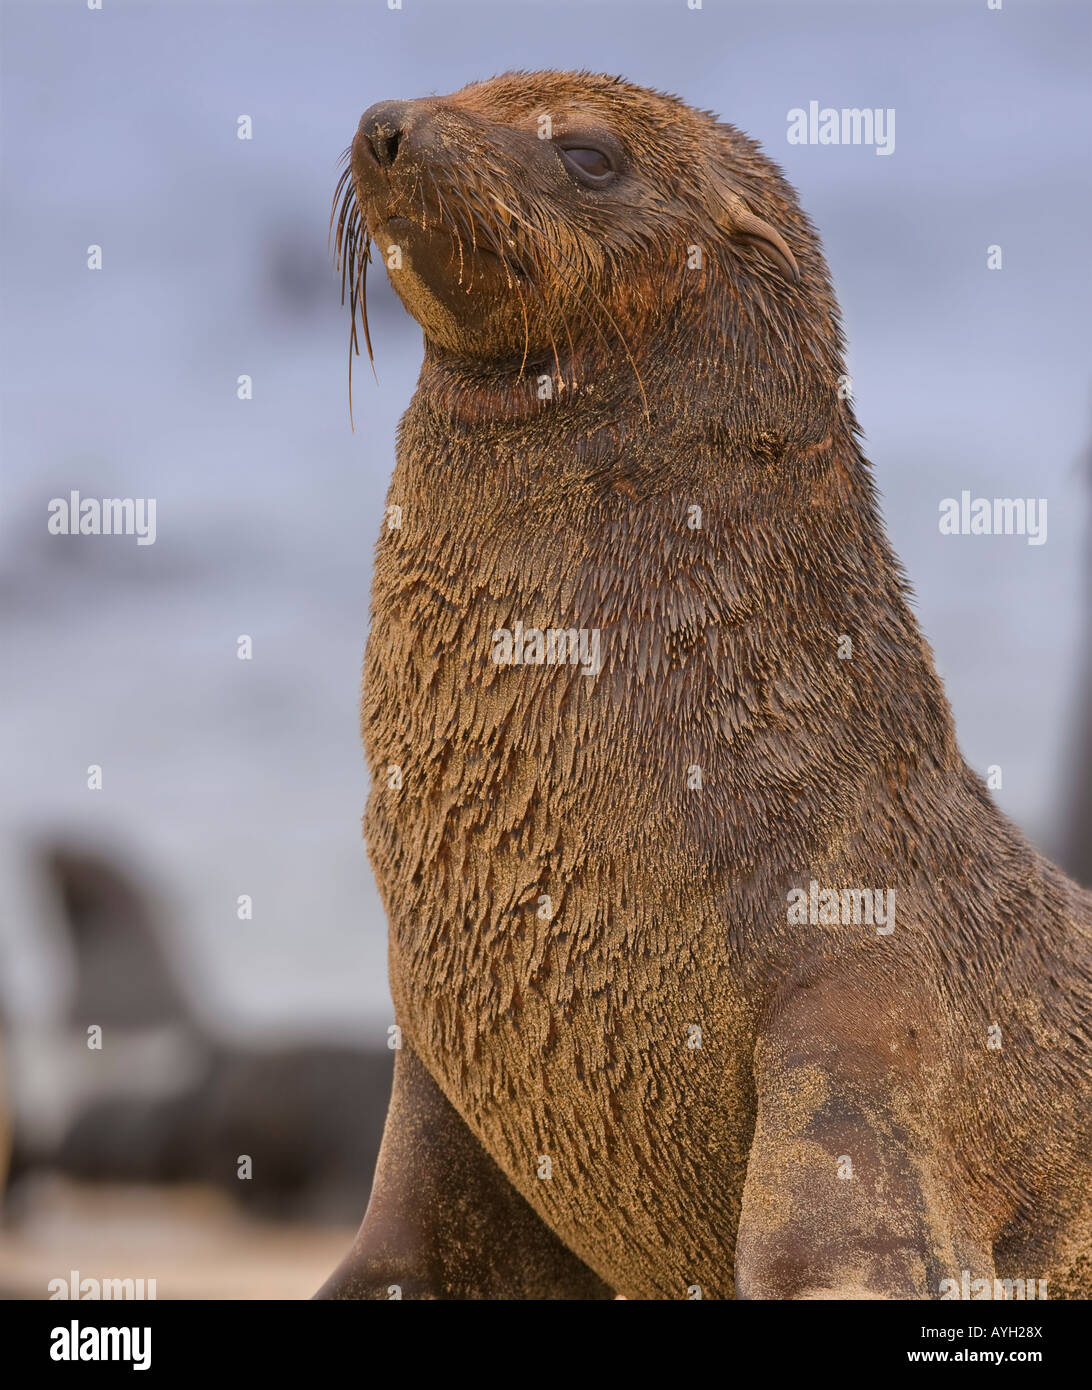 Close up of South African Fur Seal, Namibie, Afrique Banque D'Images